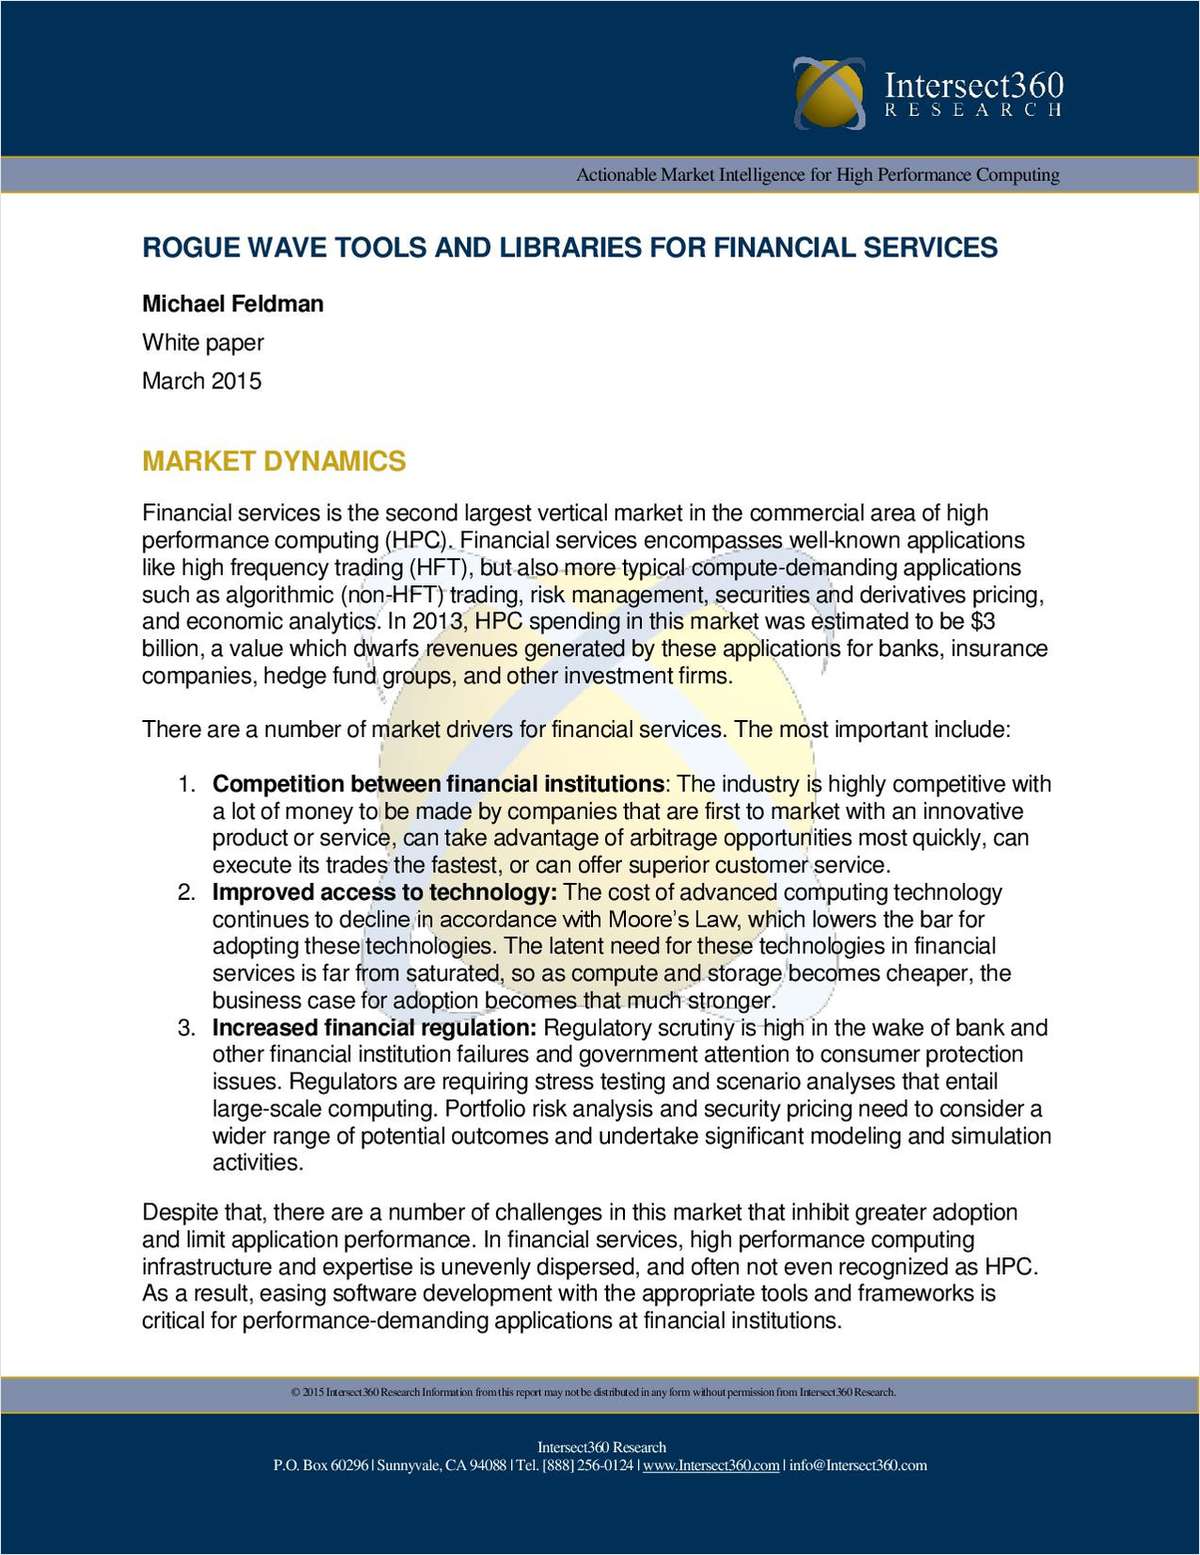 Rogue Wave tools and libraries for financial services